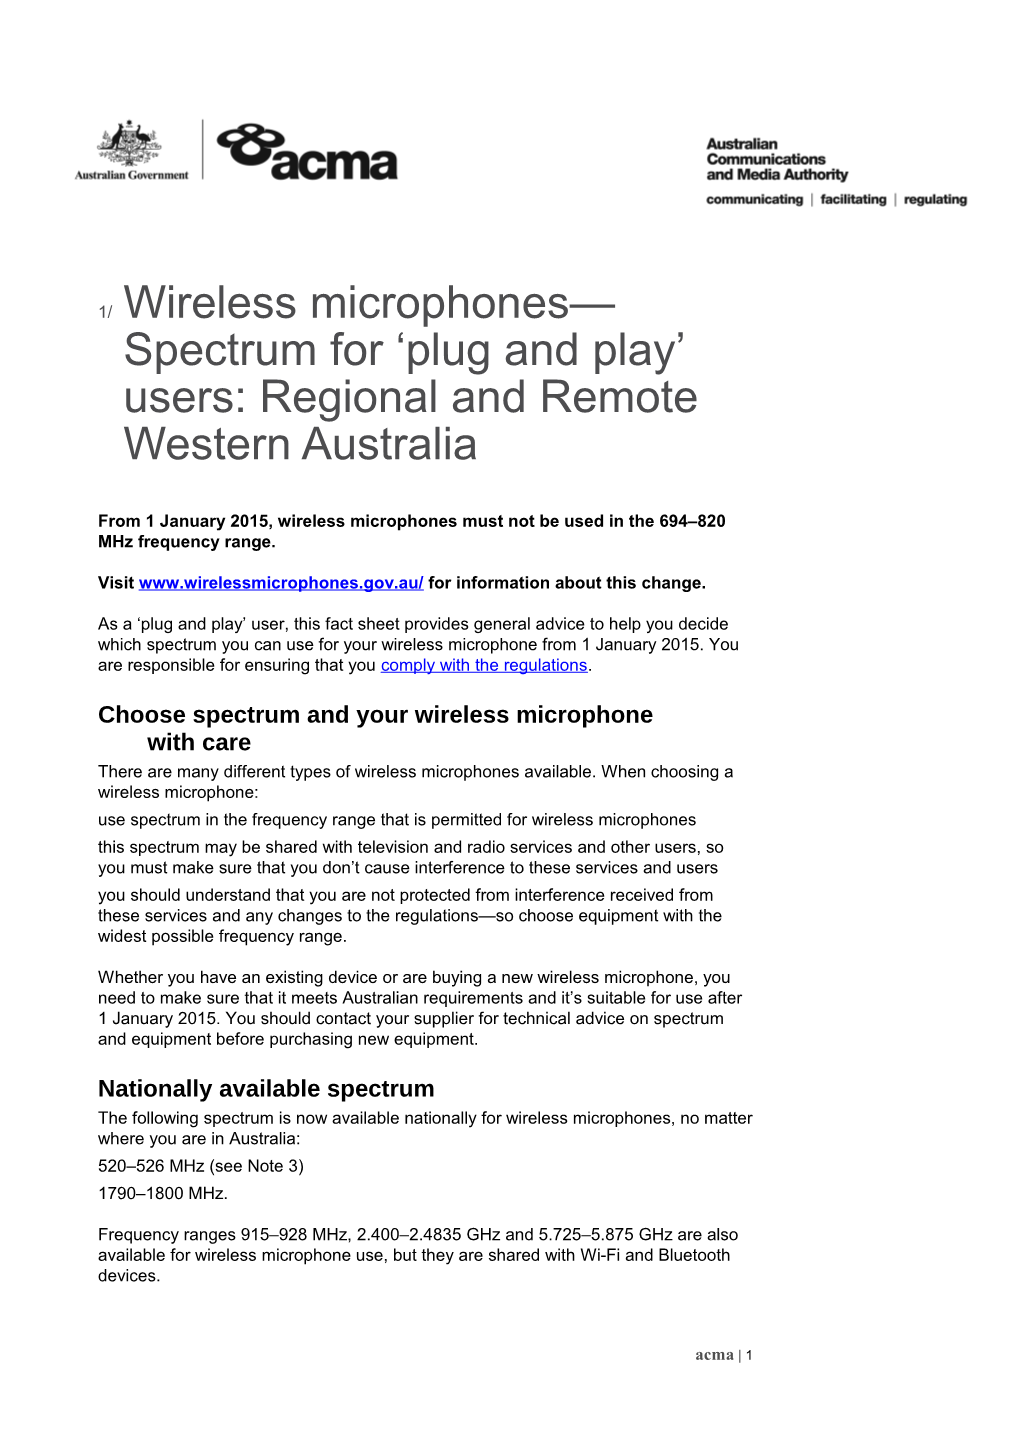 Wireless Microphones Spectrum for Plug and Play Users: Regional and Remote Western Australia